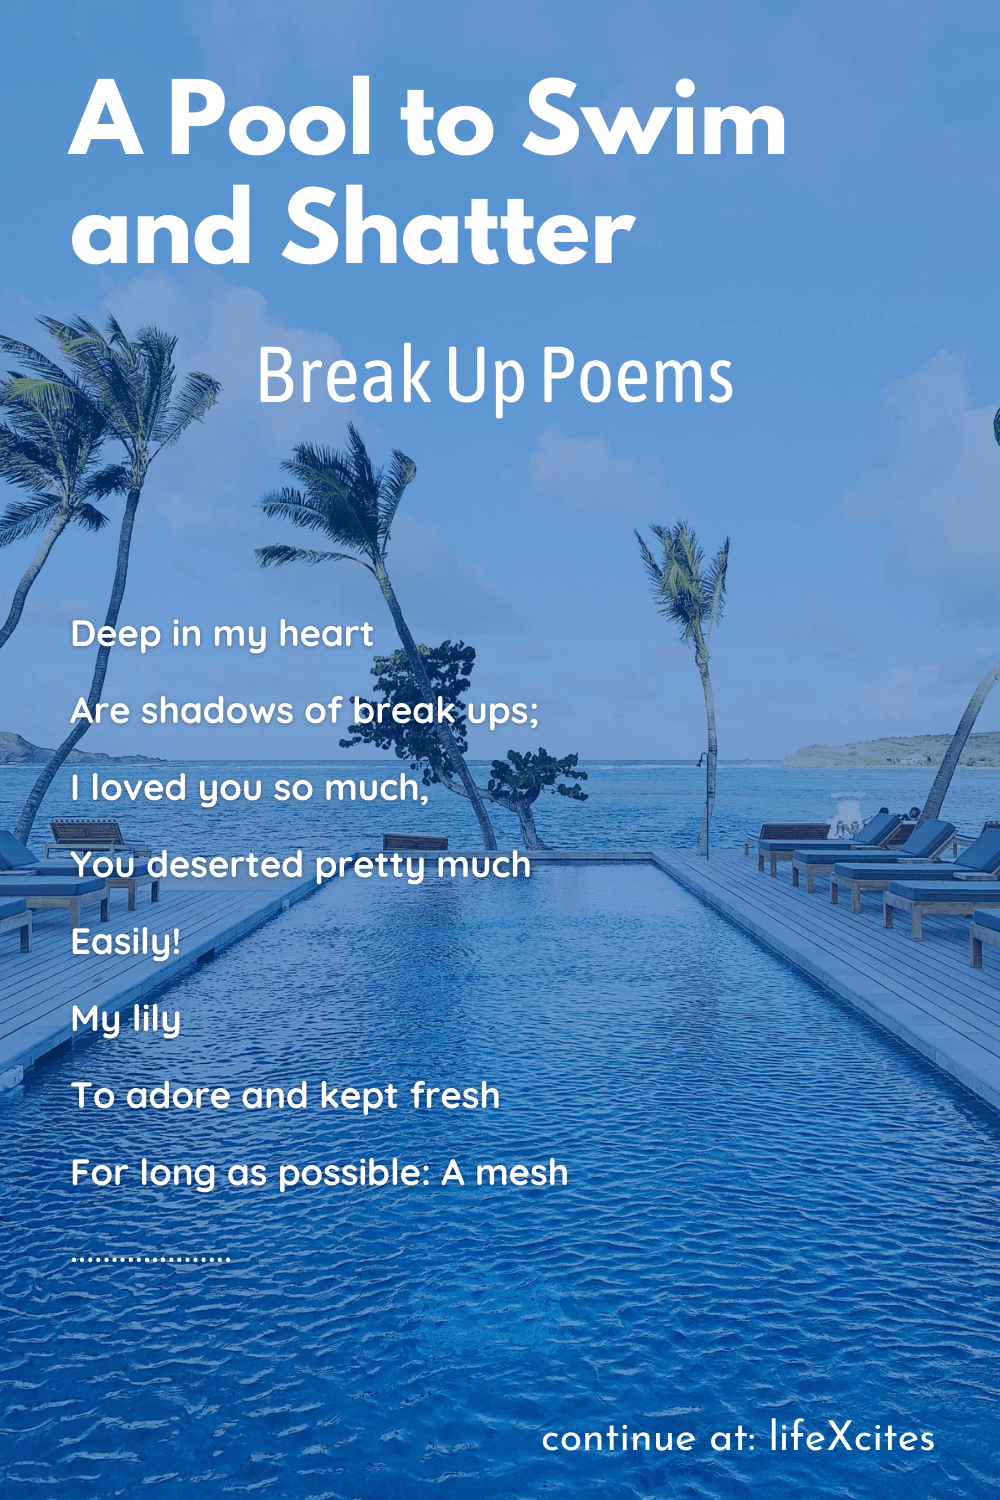 A Pool to Swim and Shatter – Break Up Poems